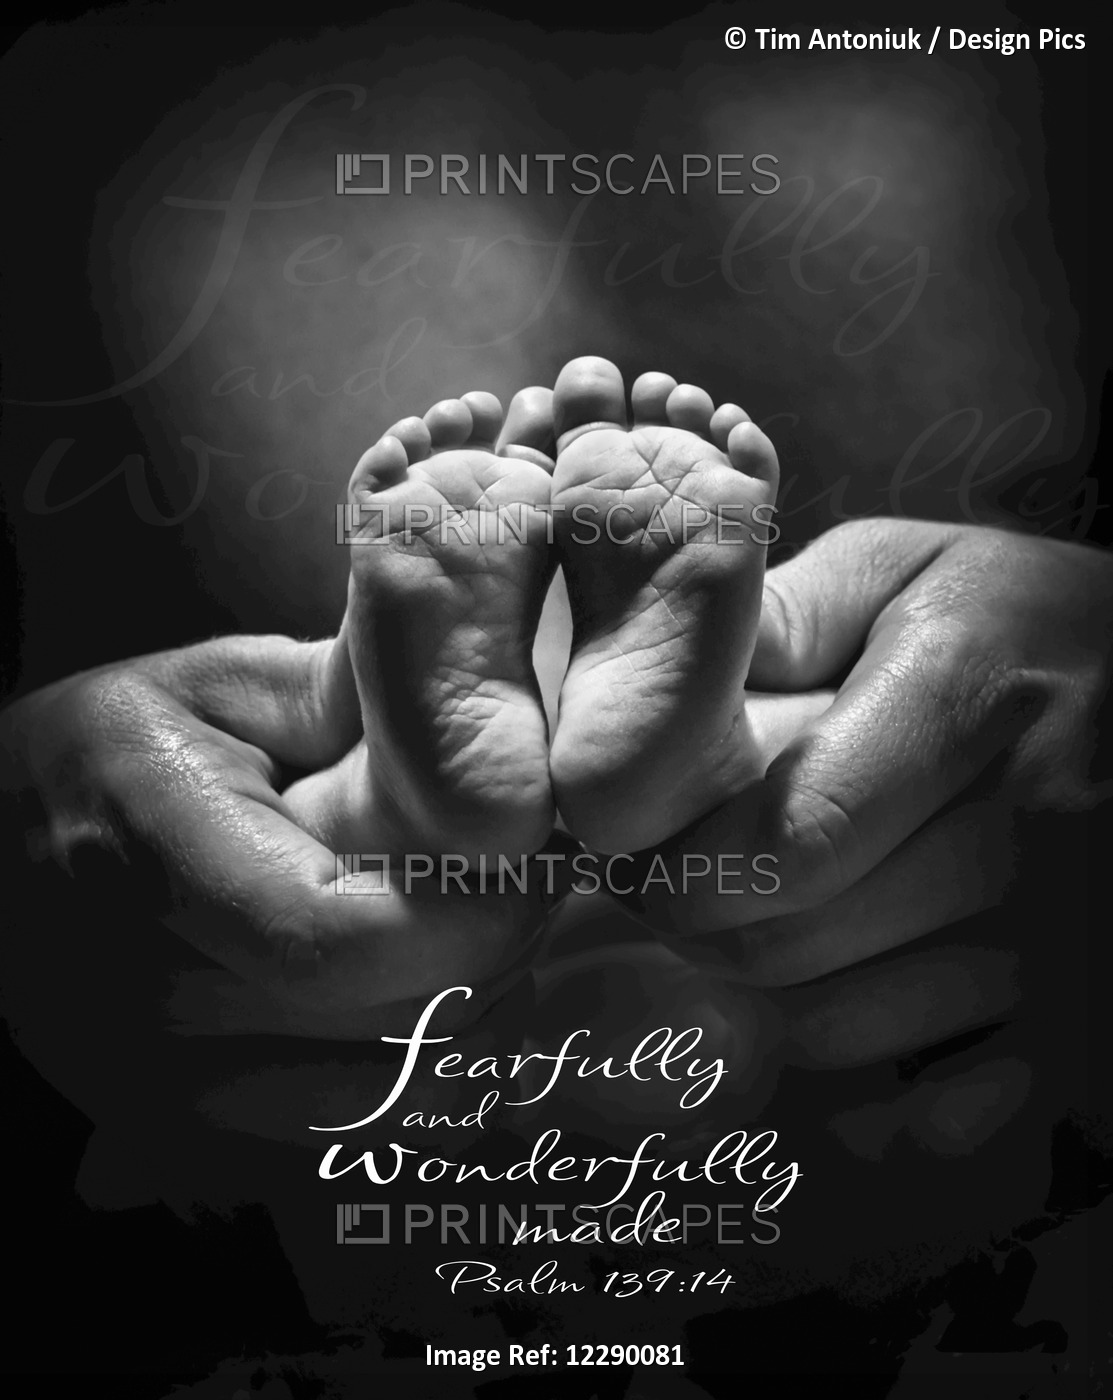 Image Of A Parents Hands Holding Newborn Baby Bare Feet And A Scripture From ...